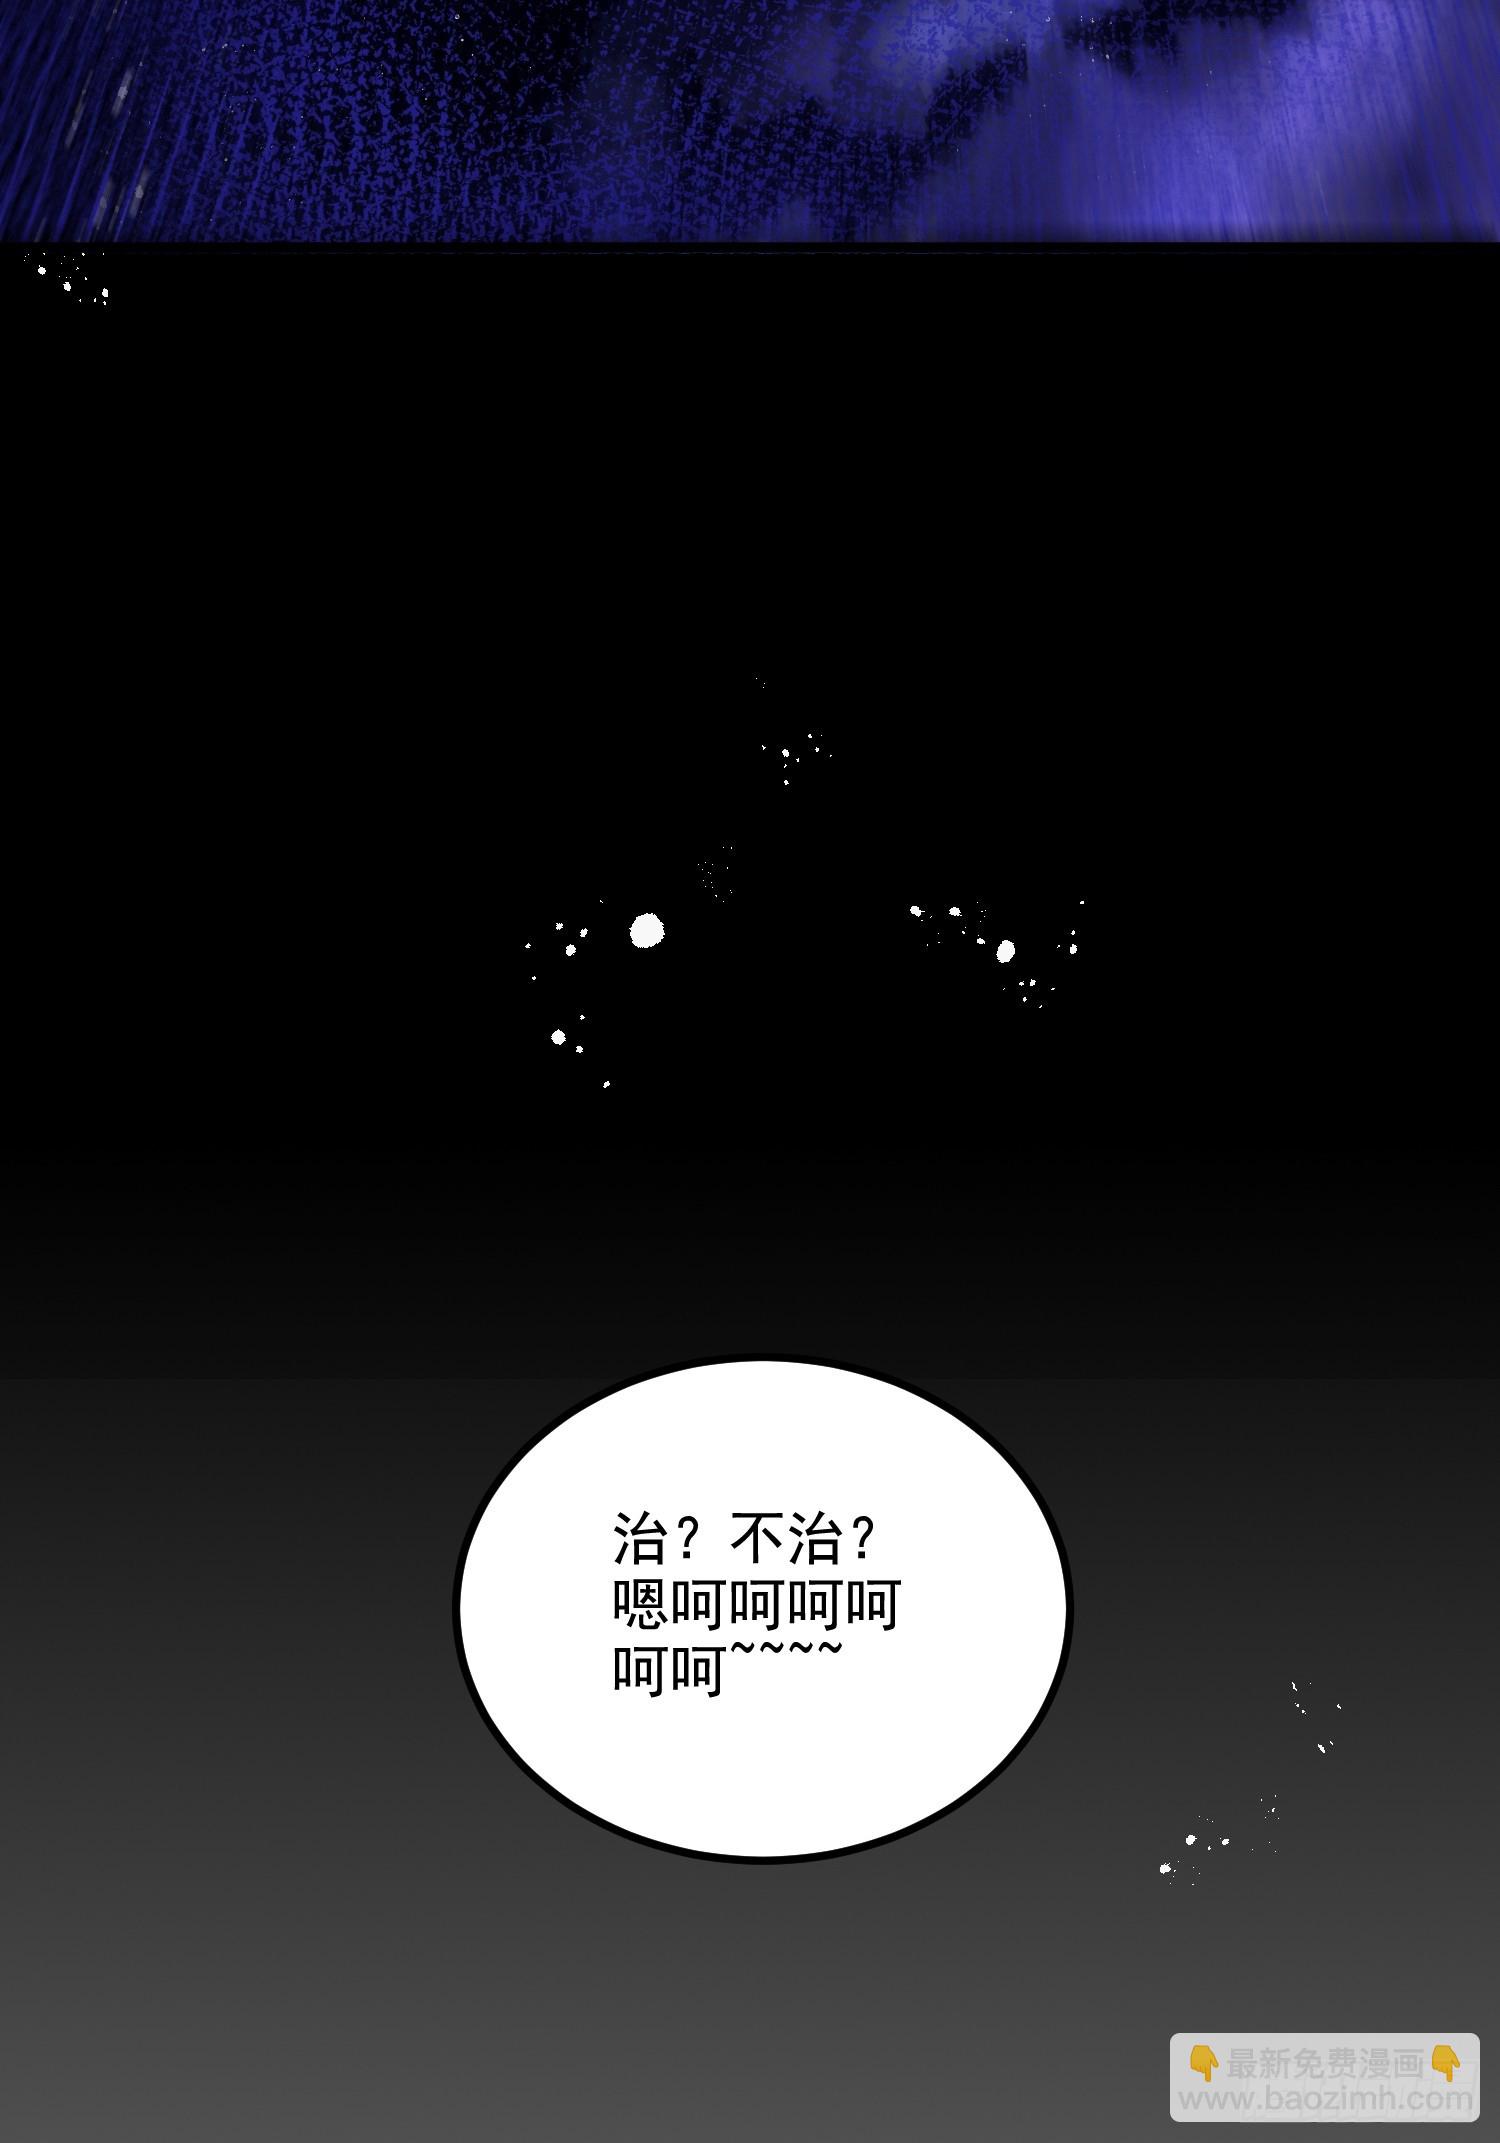 無常4843號 - 第73話 - 2